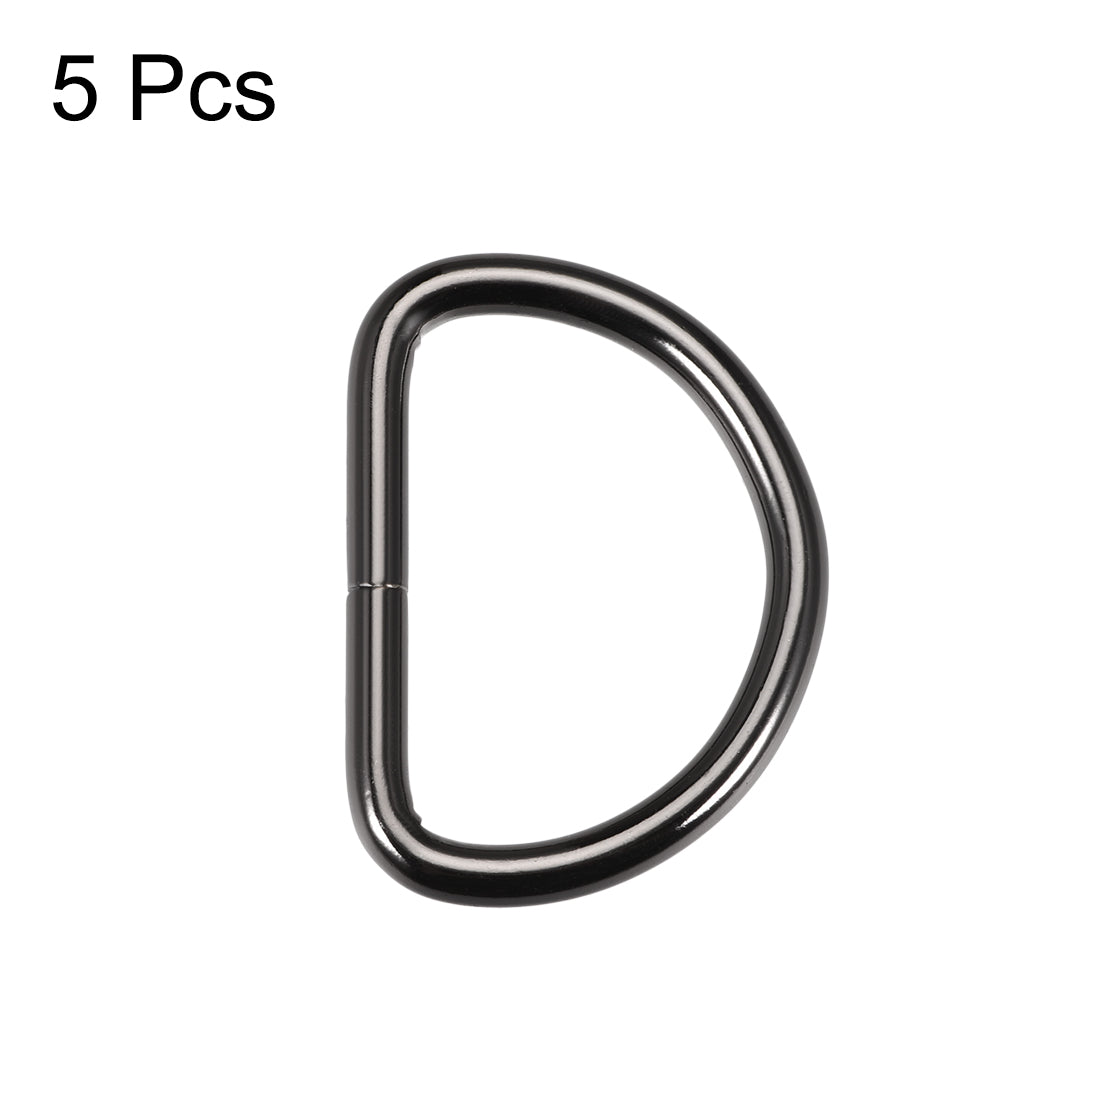 uxcell Uxcell 5 Pcs D Ring Buckle 1.6 Inch Metal Semi-Circular D-Rings Black for Hardware Bags Belts Craft DIY Accessories